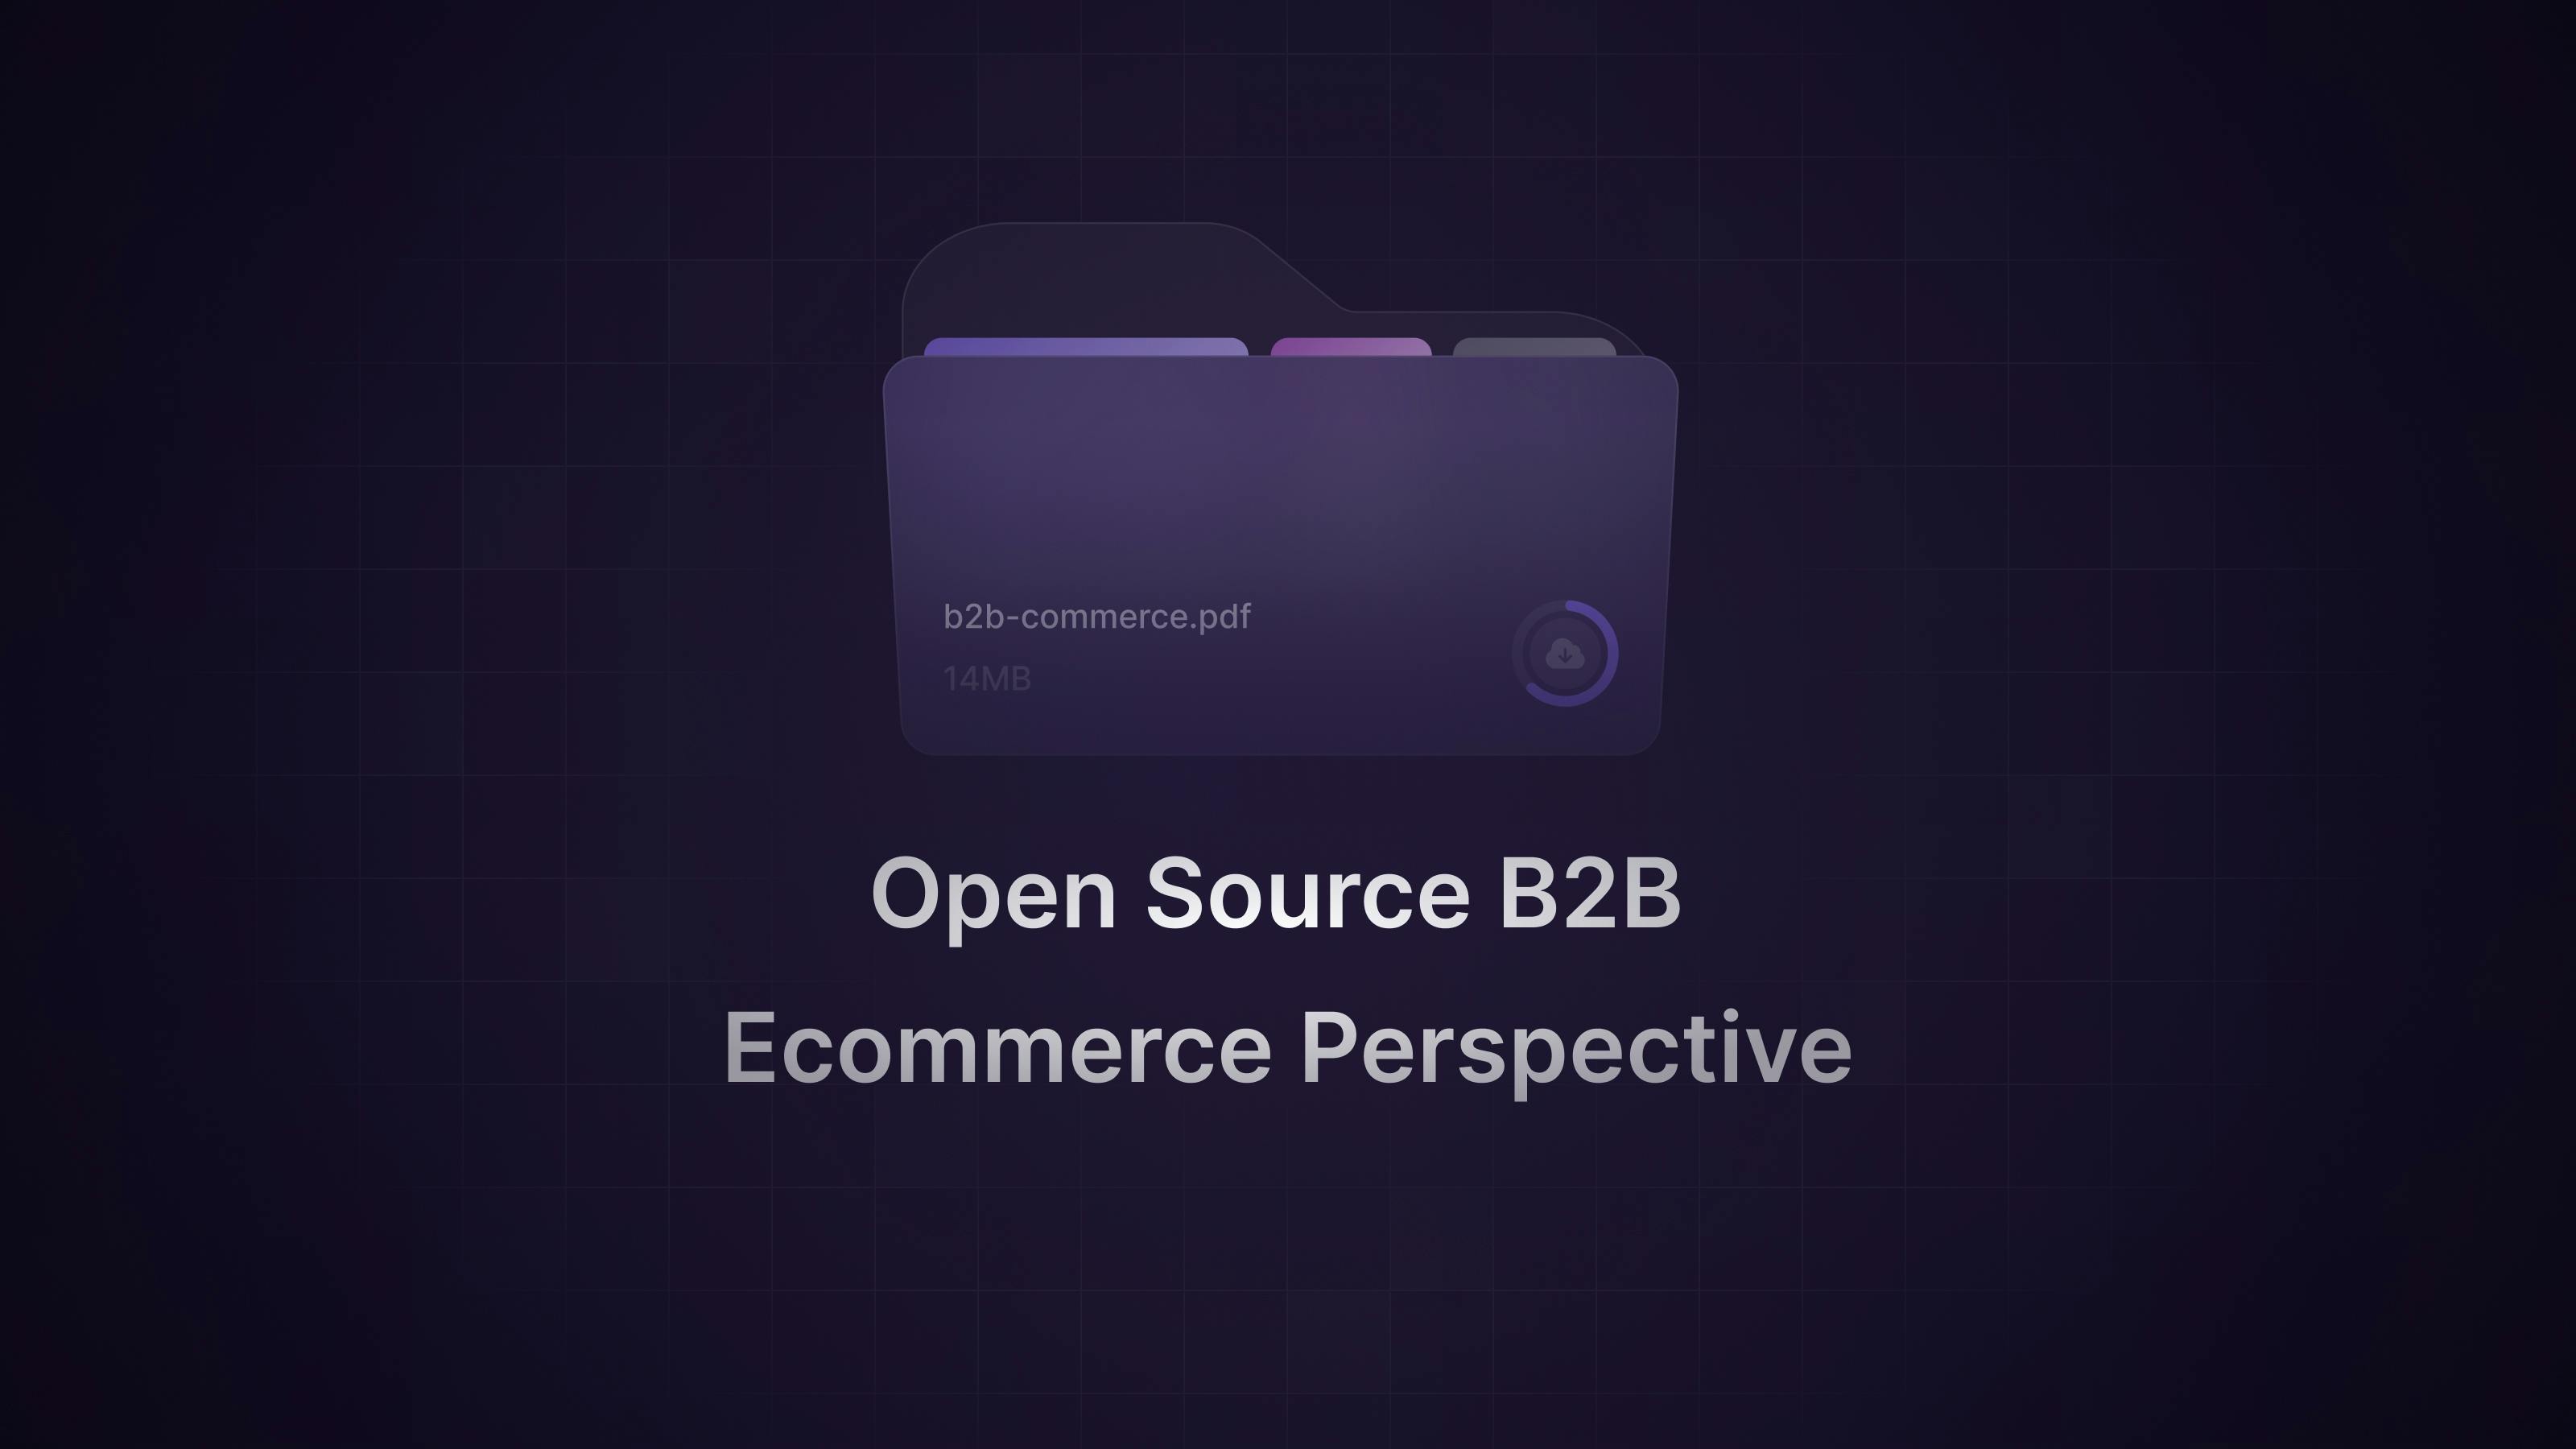 Open Source B2B Ecommerce an industry perspective